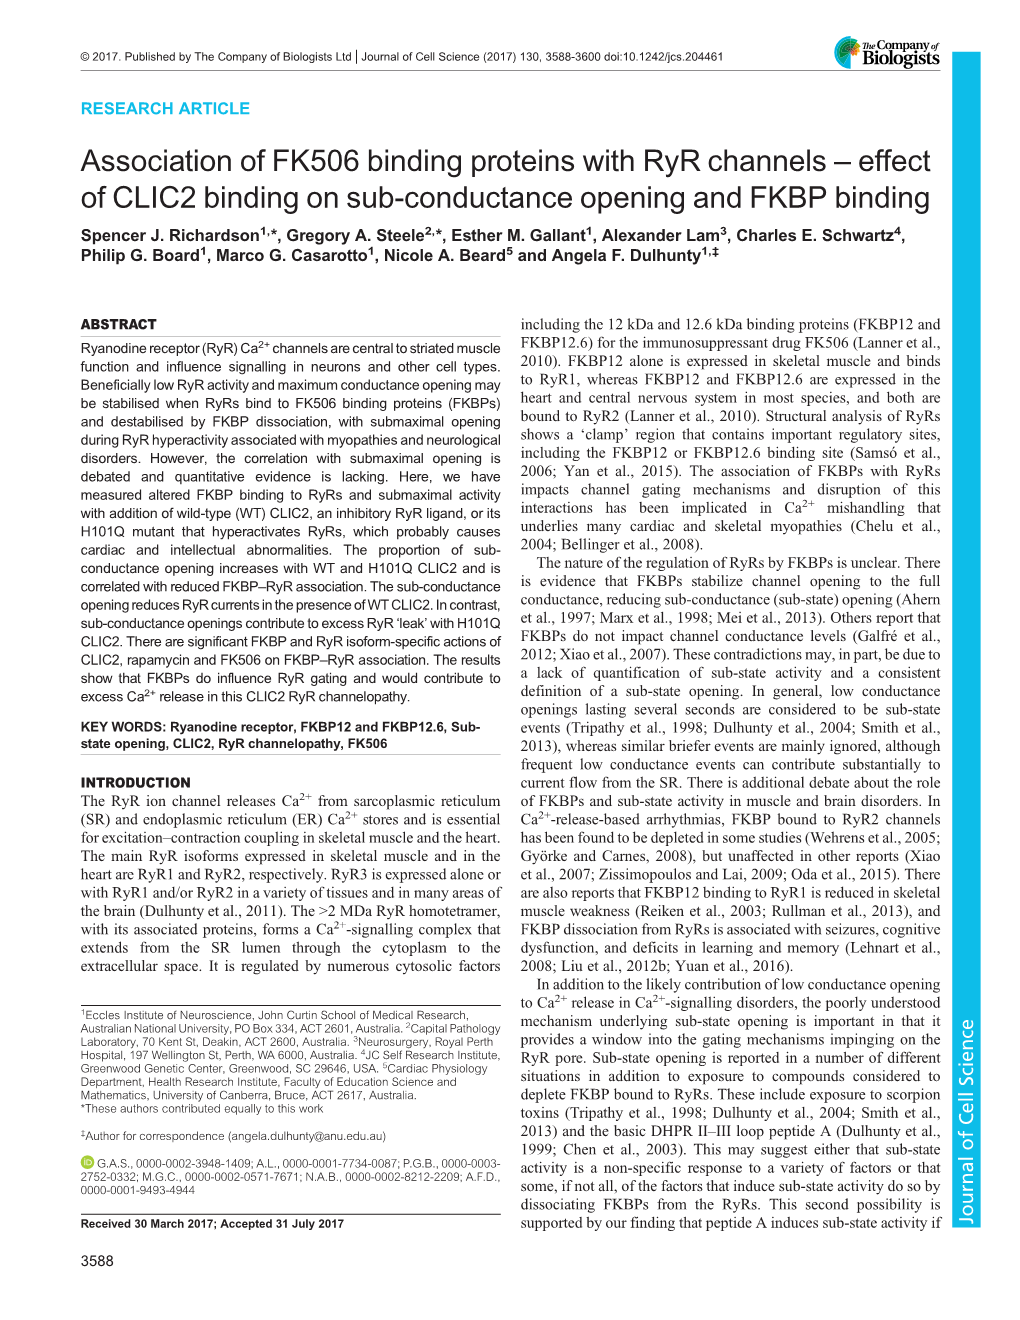 Association of FK506 Binding Proteins with Ryr Channels – Effect of CLIC2 Binding on Sub-Conductance Opening and FKBP Binding Spencer J